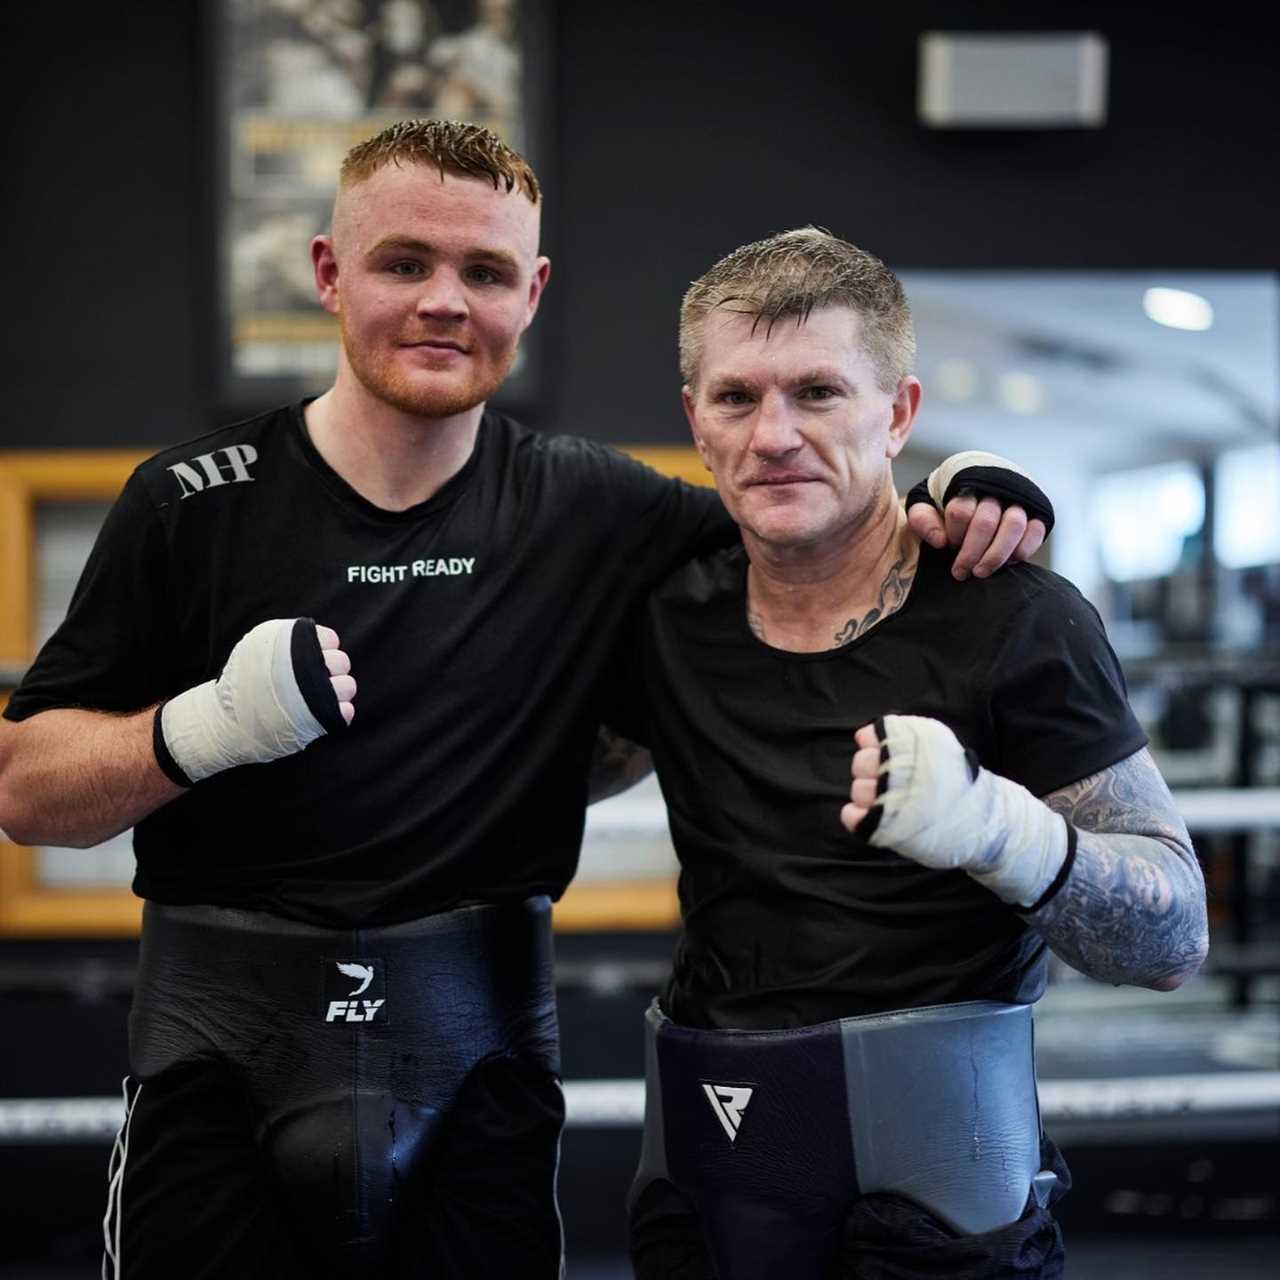 Ricky Hatton shares secrets to amazing transformations in seven weeks, including reducing the number of cupspas per day by half.